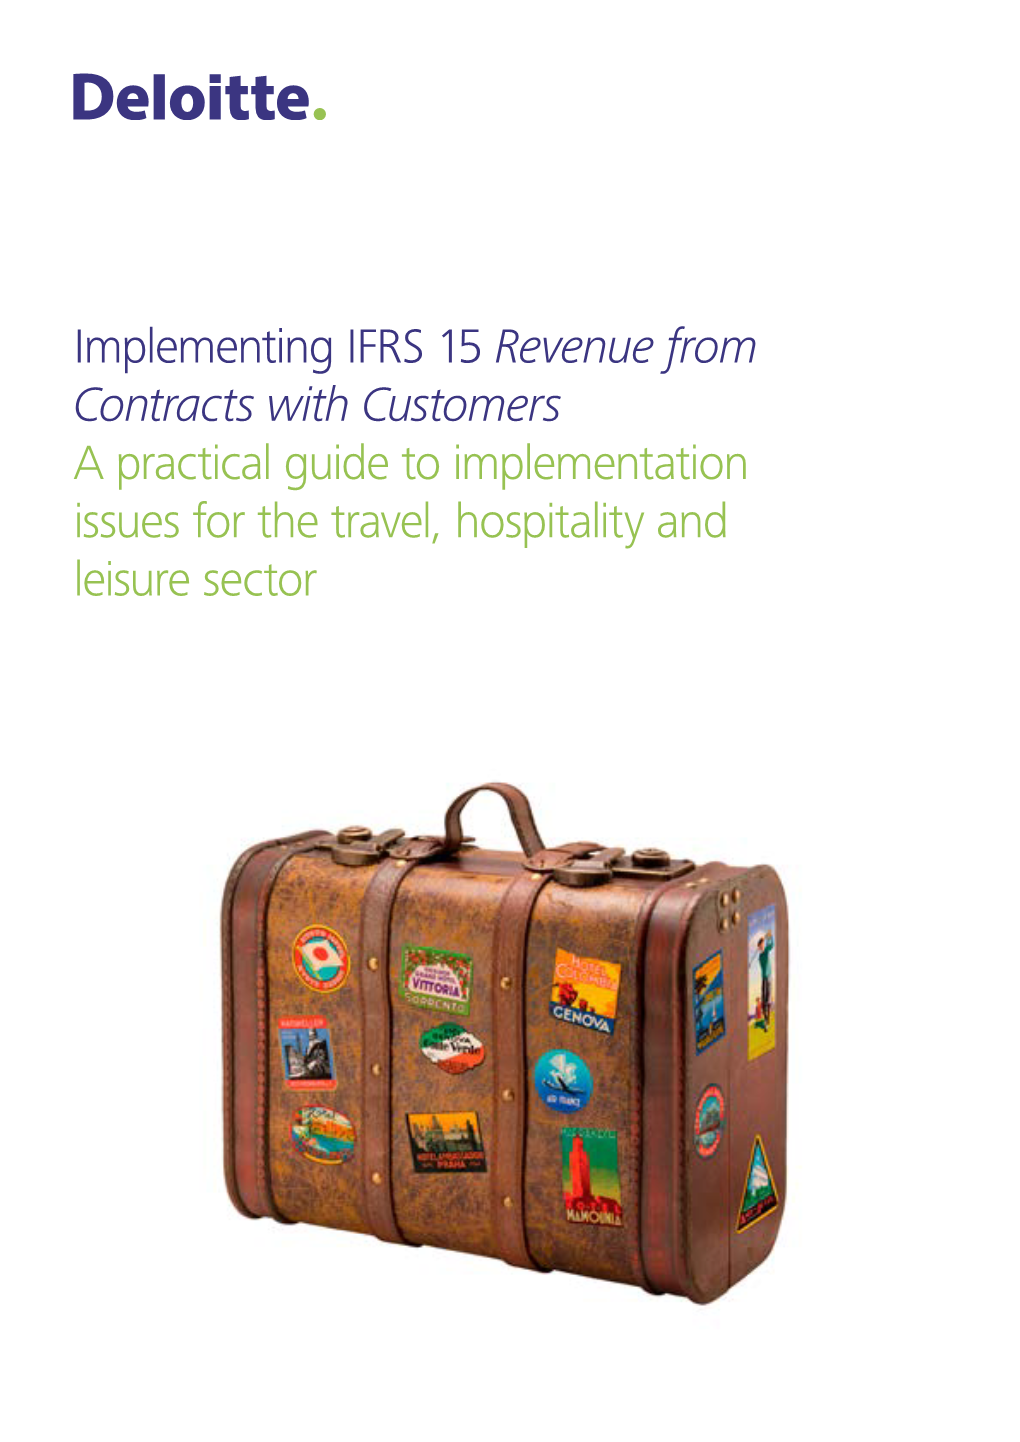 Implementing IFRS 15 Revenue from Contracts with Customers a Practical Guide to Implementation Issues for the Travel, Hospitality and Leisure Sector Contents